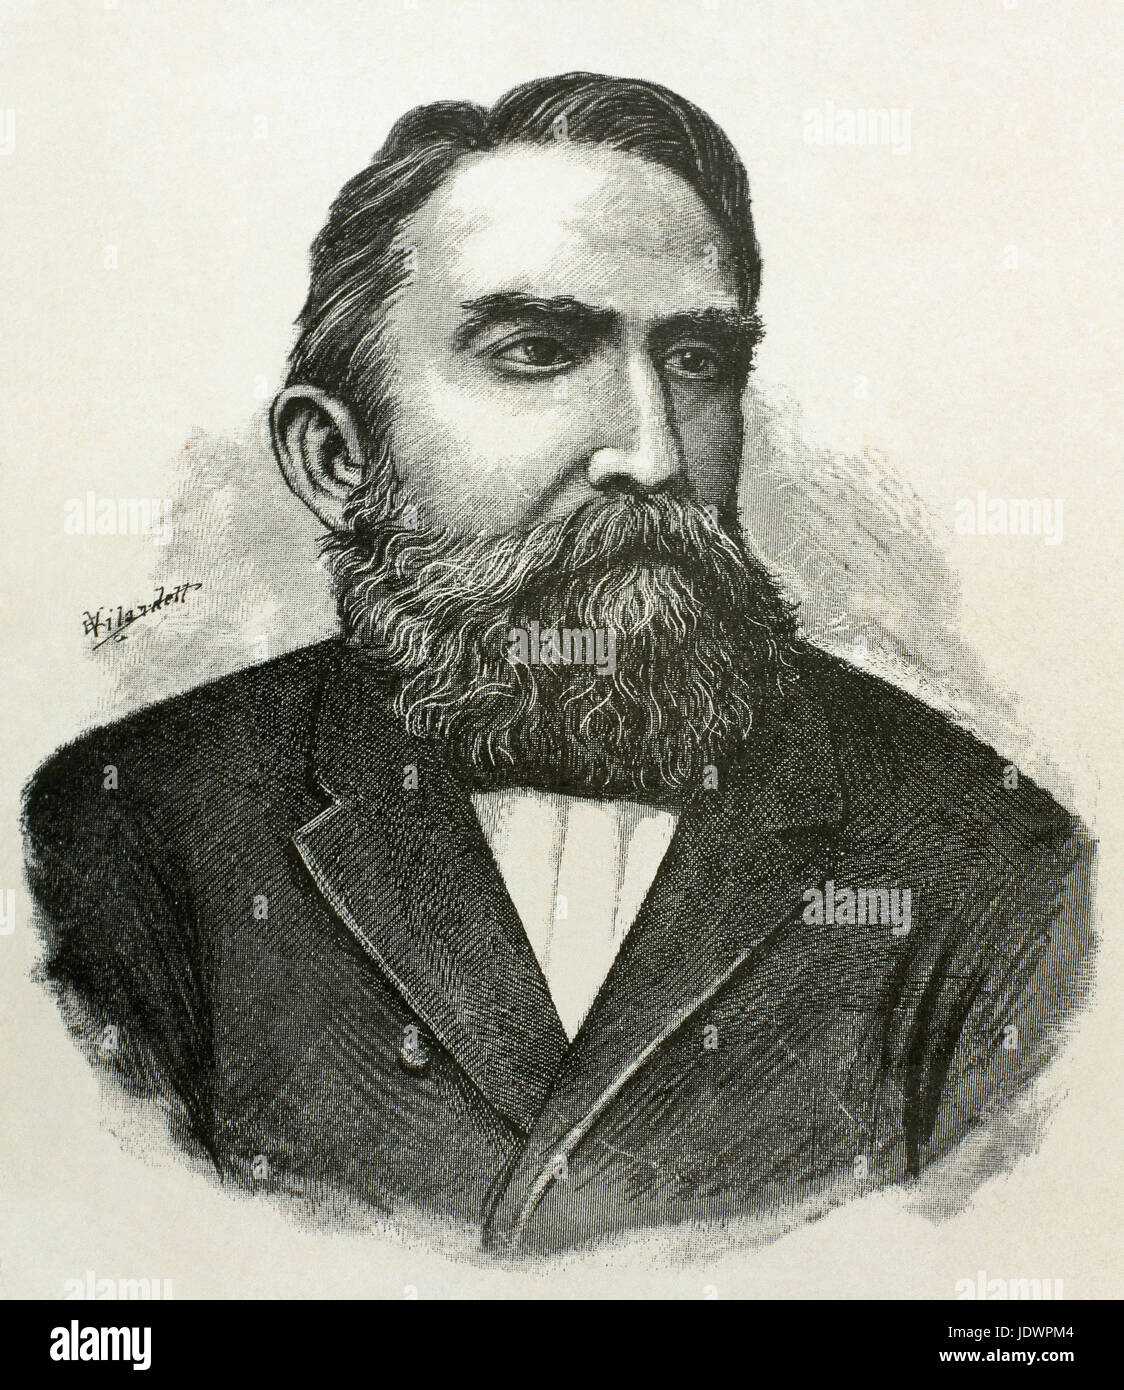 Rafael Nunez (1825-1894). Colombian author, lawyer, journalist and politician. Elected president of Colombia in 1880 and in 1884. Portrait. Engraving. 'Americanos Celebres', 1888. Stock Photo